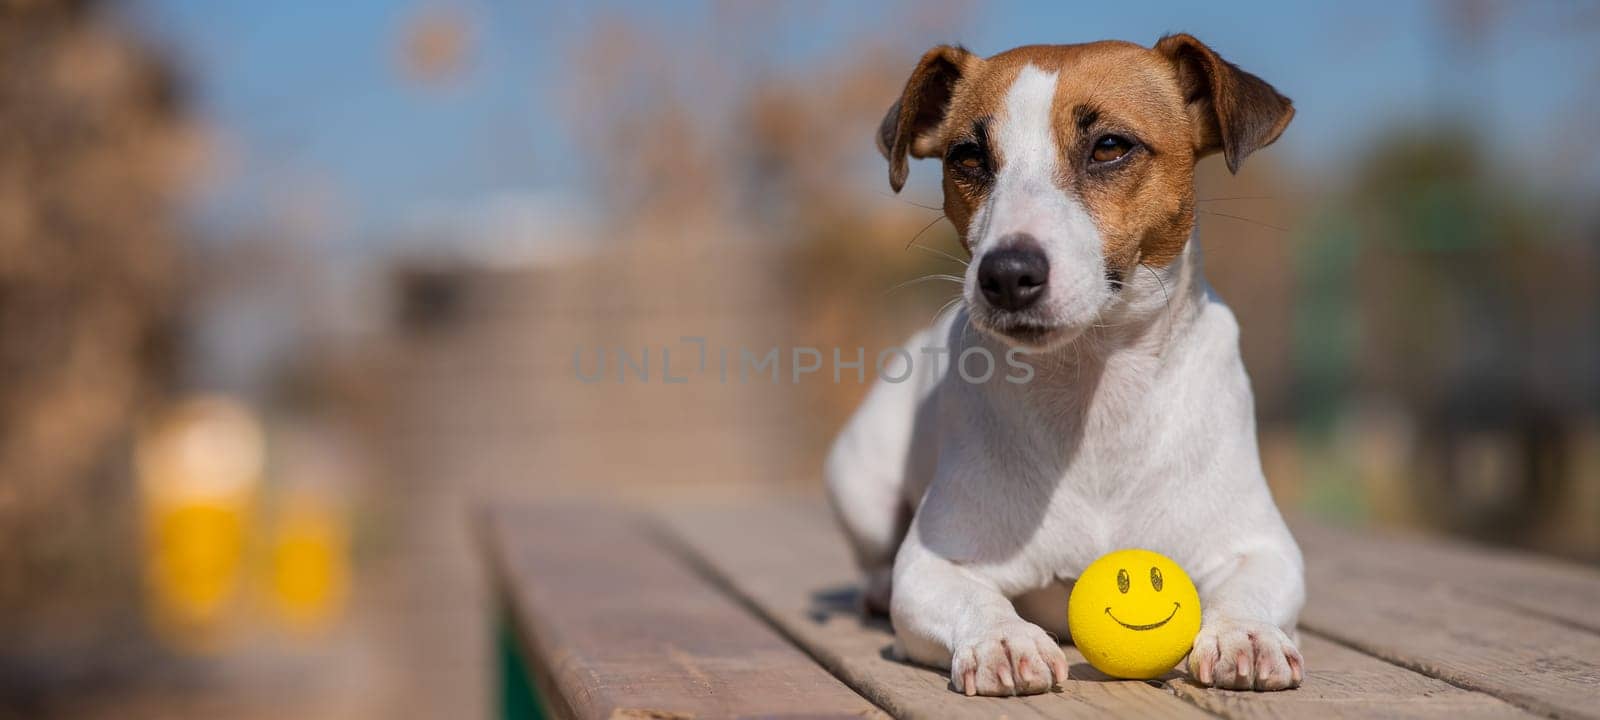 Dog Jack Russell Terrier lies on a wooden bench with a yellow ball with a face. by mrwed54